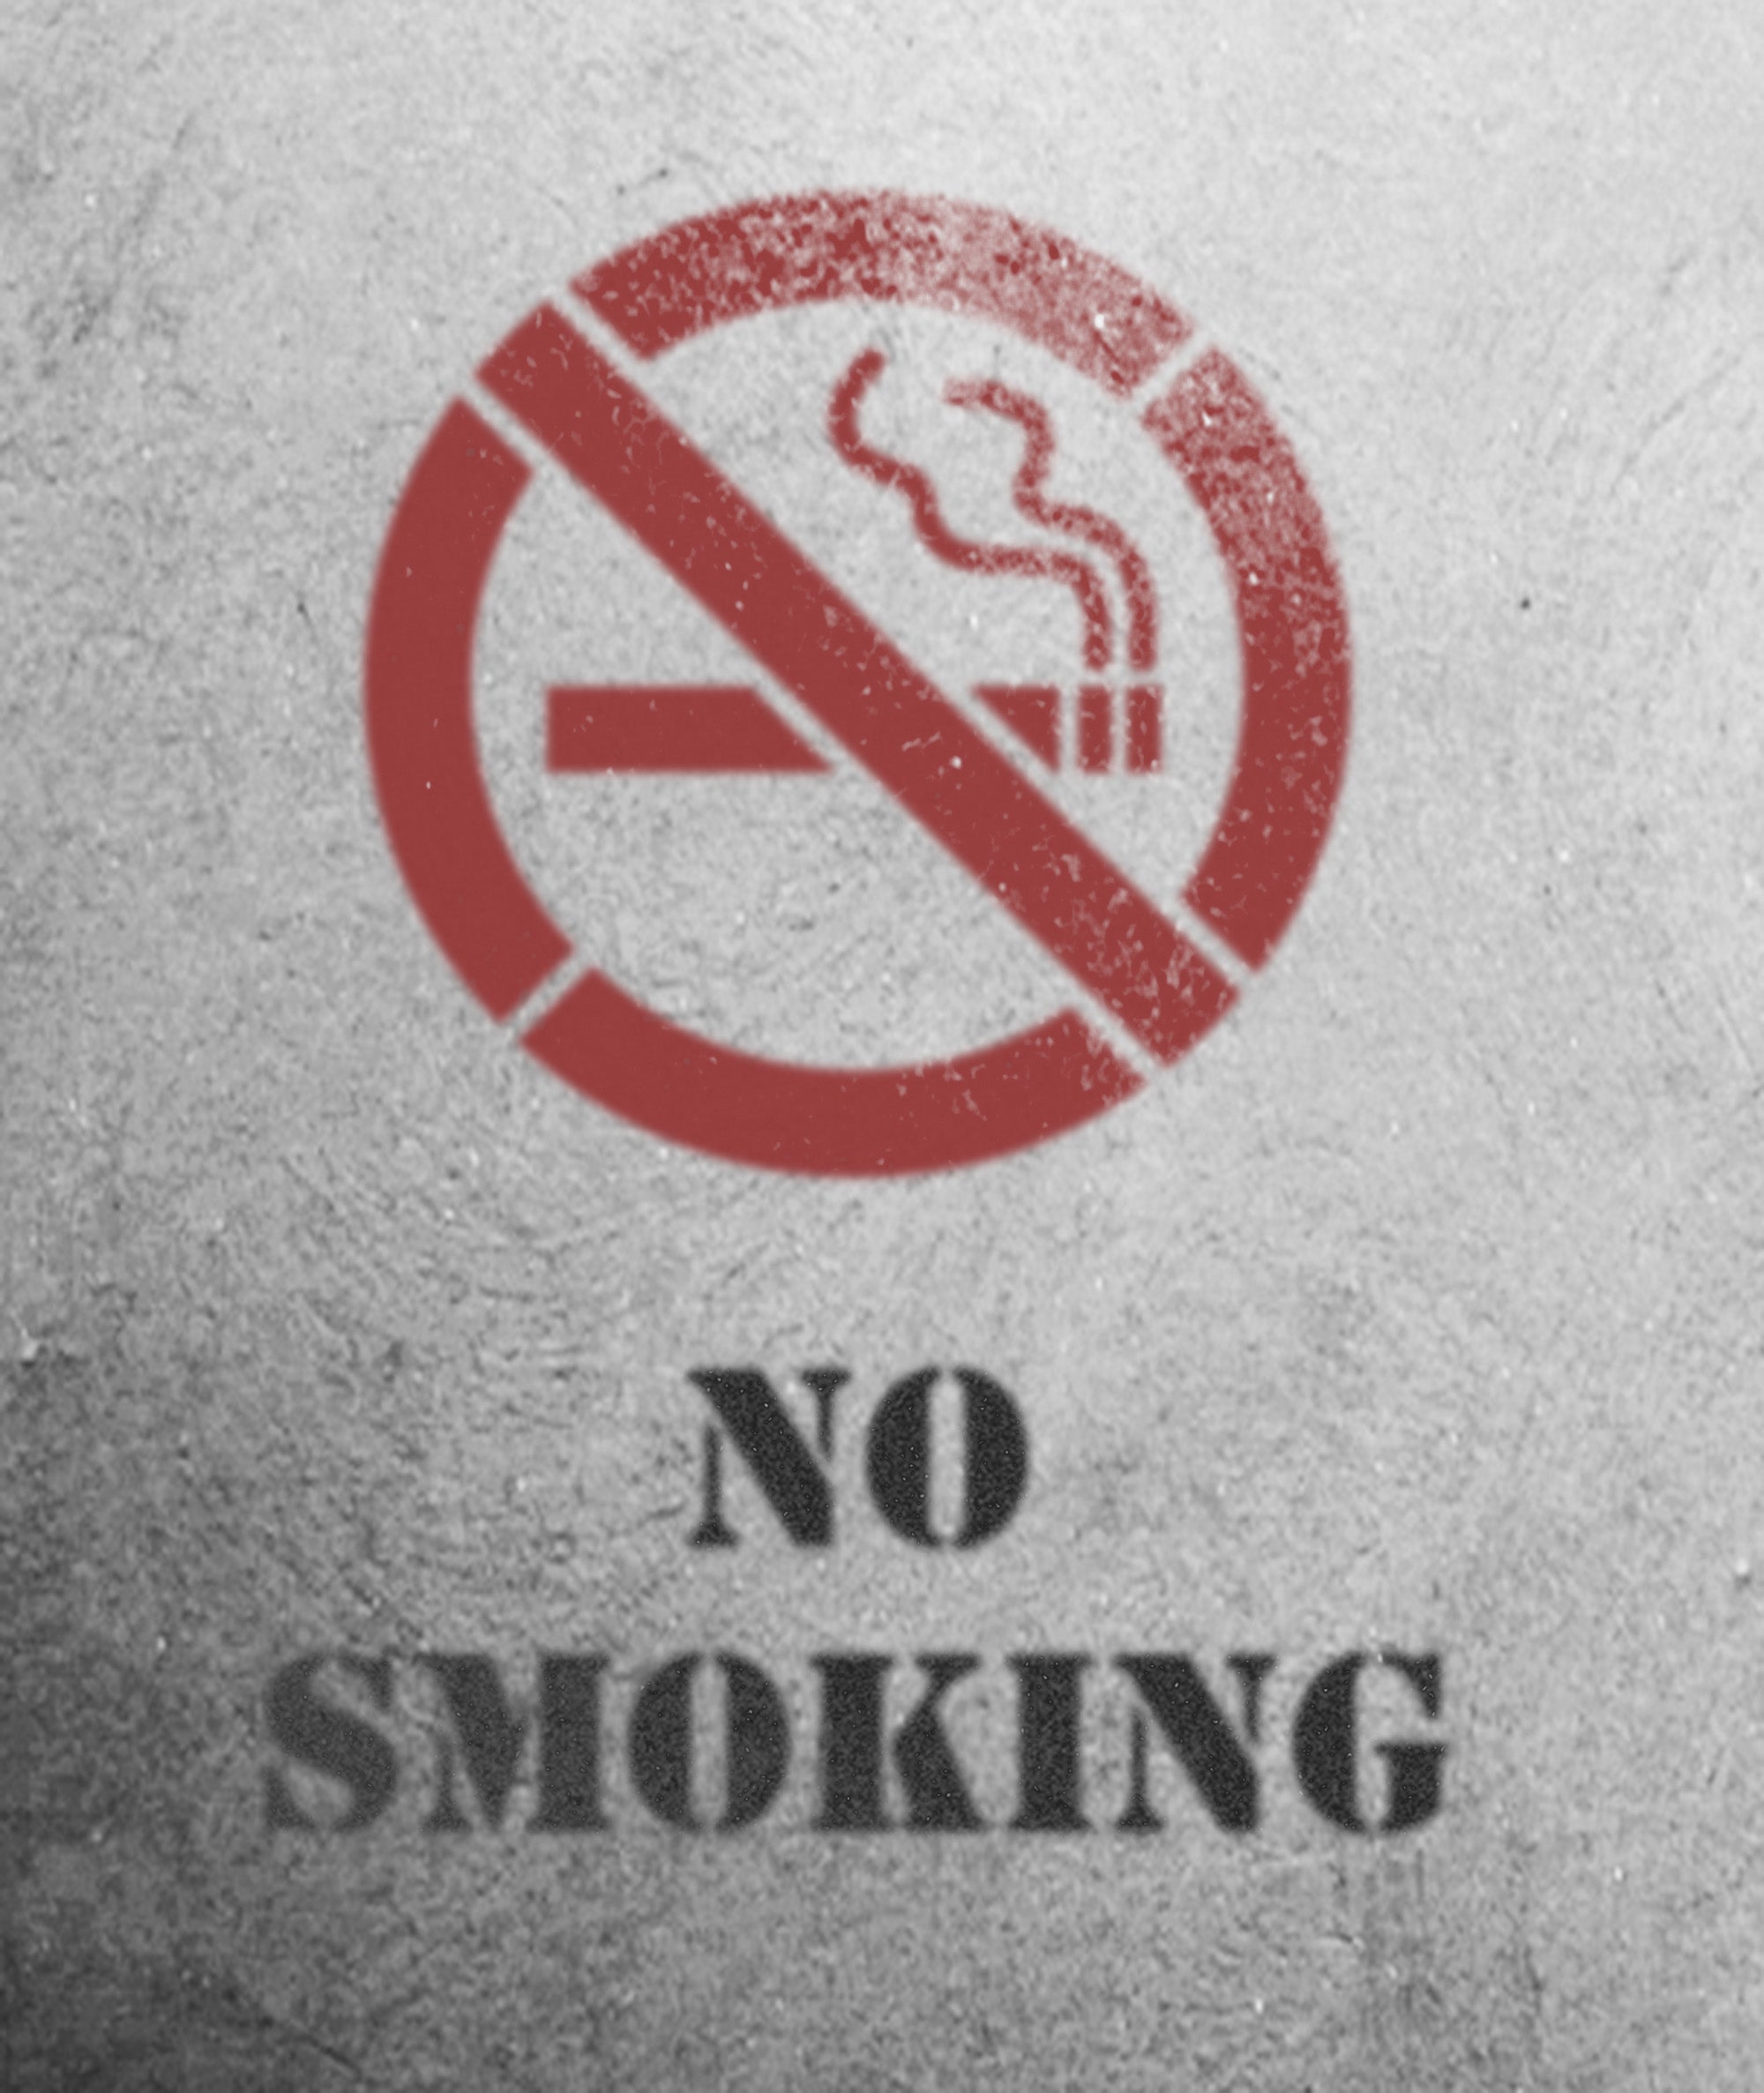 No Smoking Sign Stencil - Health and Safety Template